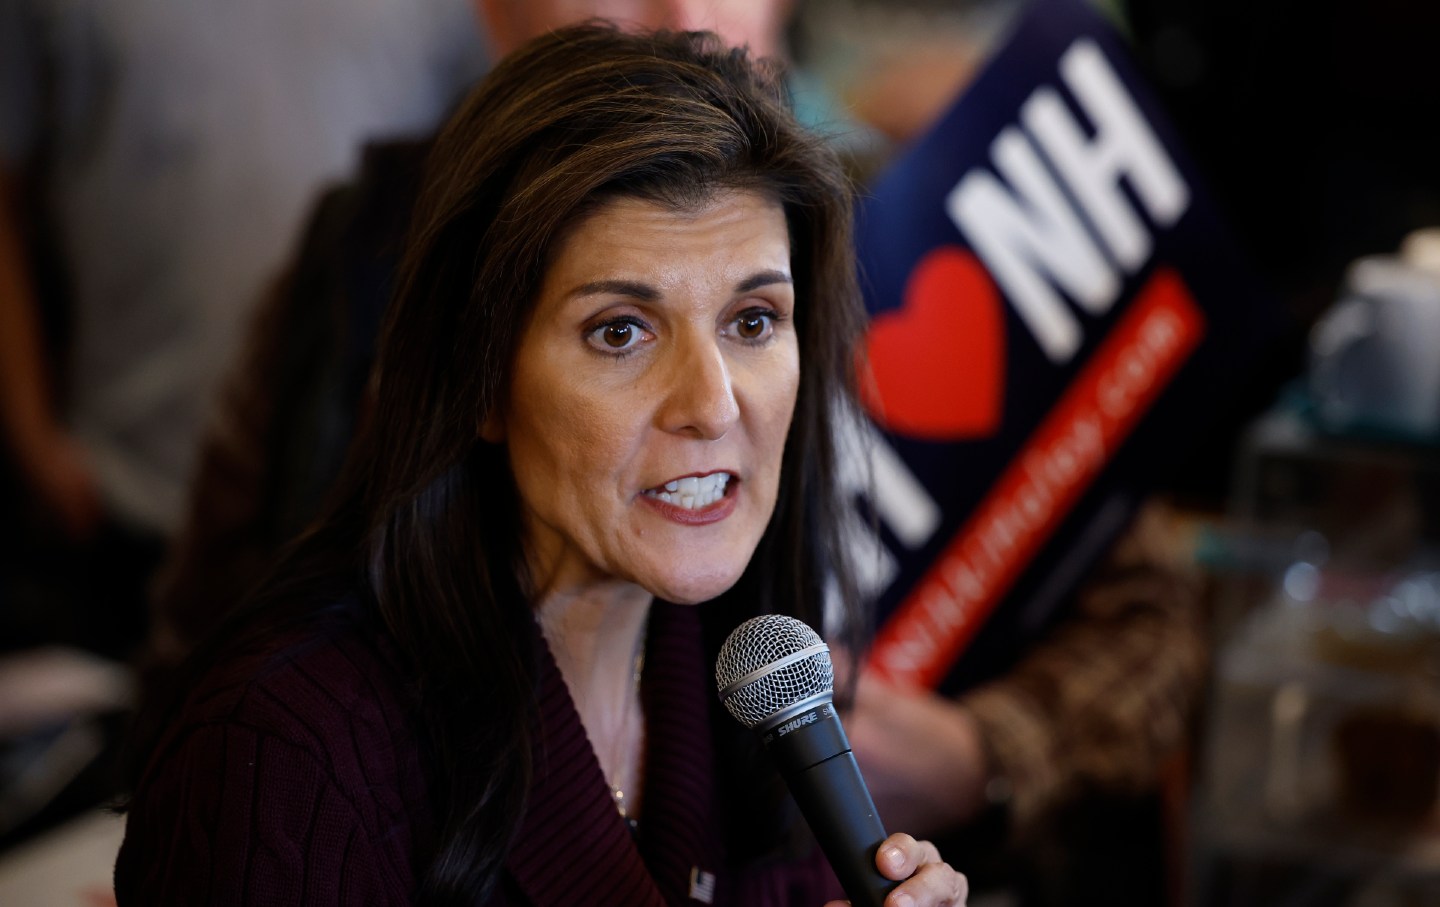 Nikki Haley talks to a group of people while campaigning in New Hampshire.